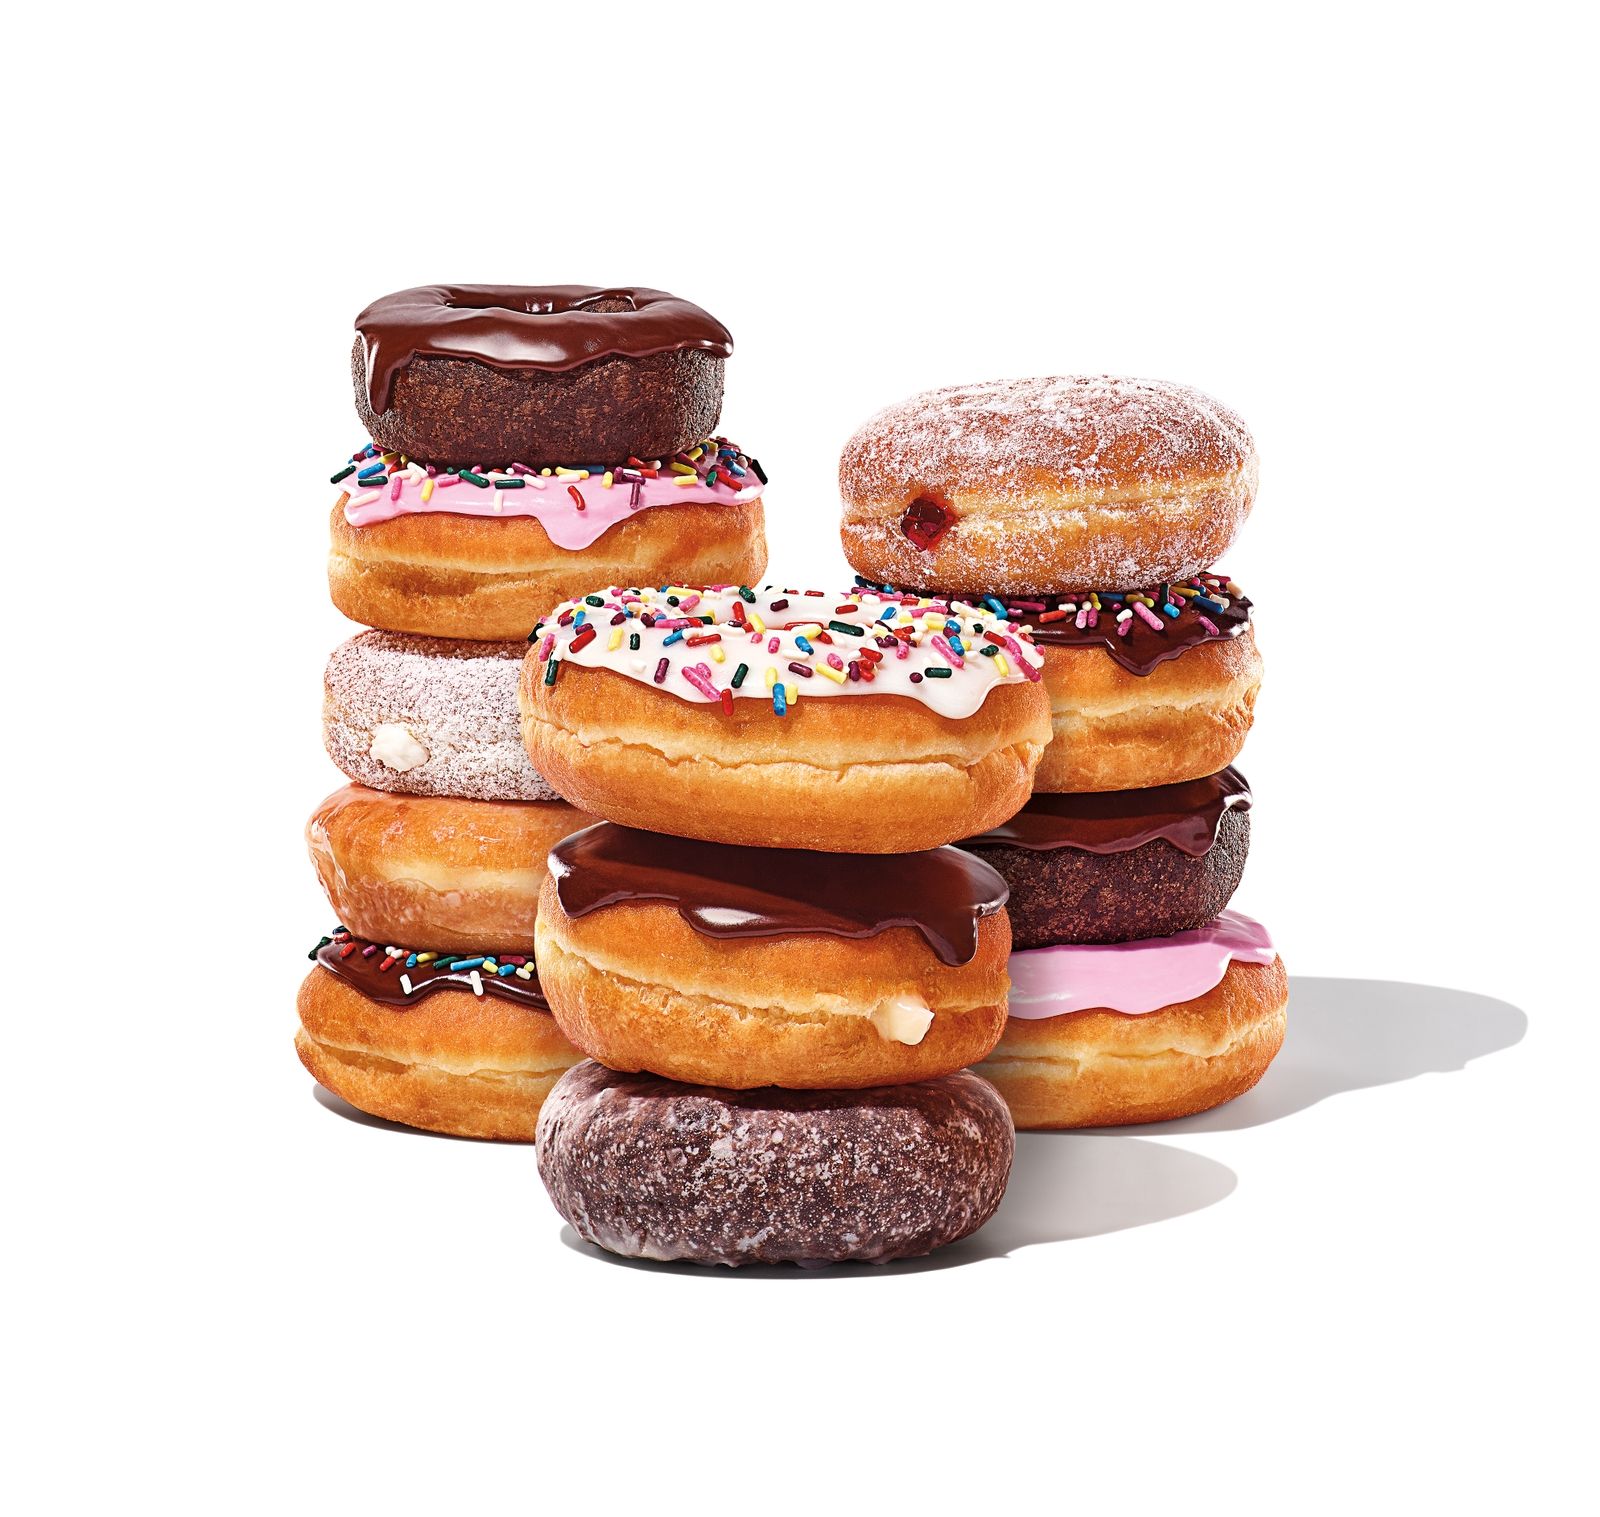 Free Donut Wednes-YAY at Dunkin’ WITH ANY DRINK PURCHASE! 